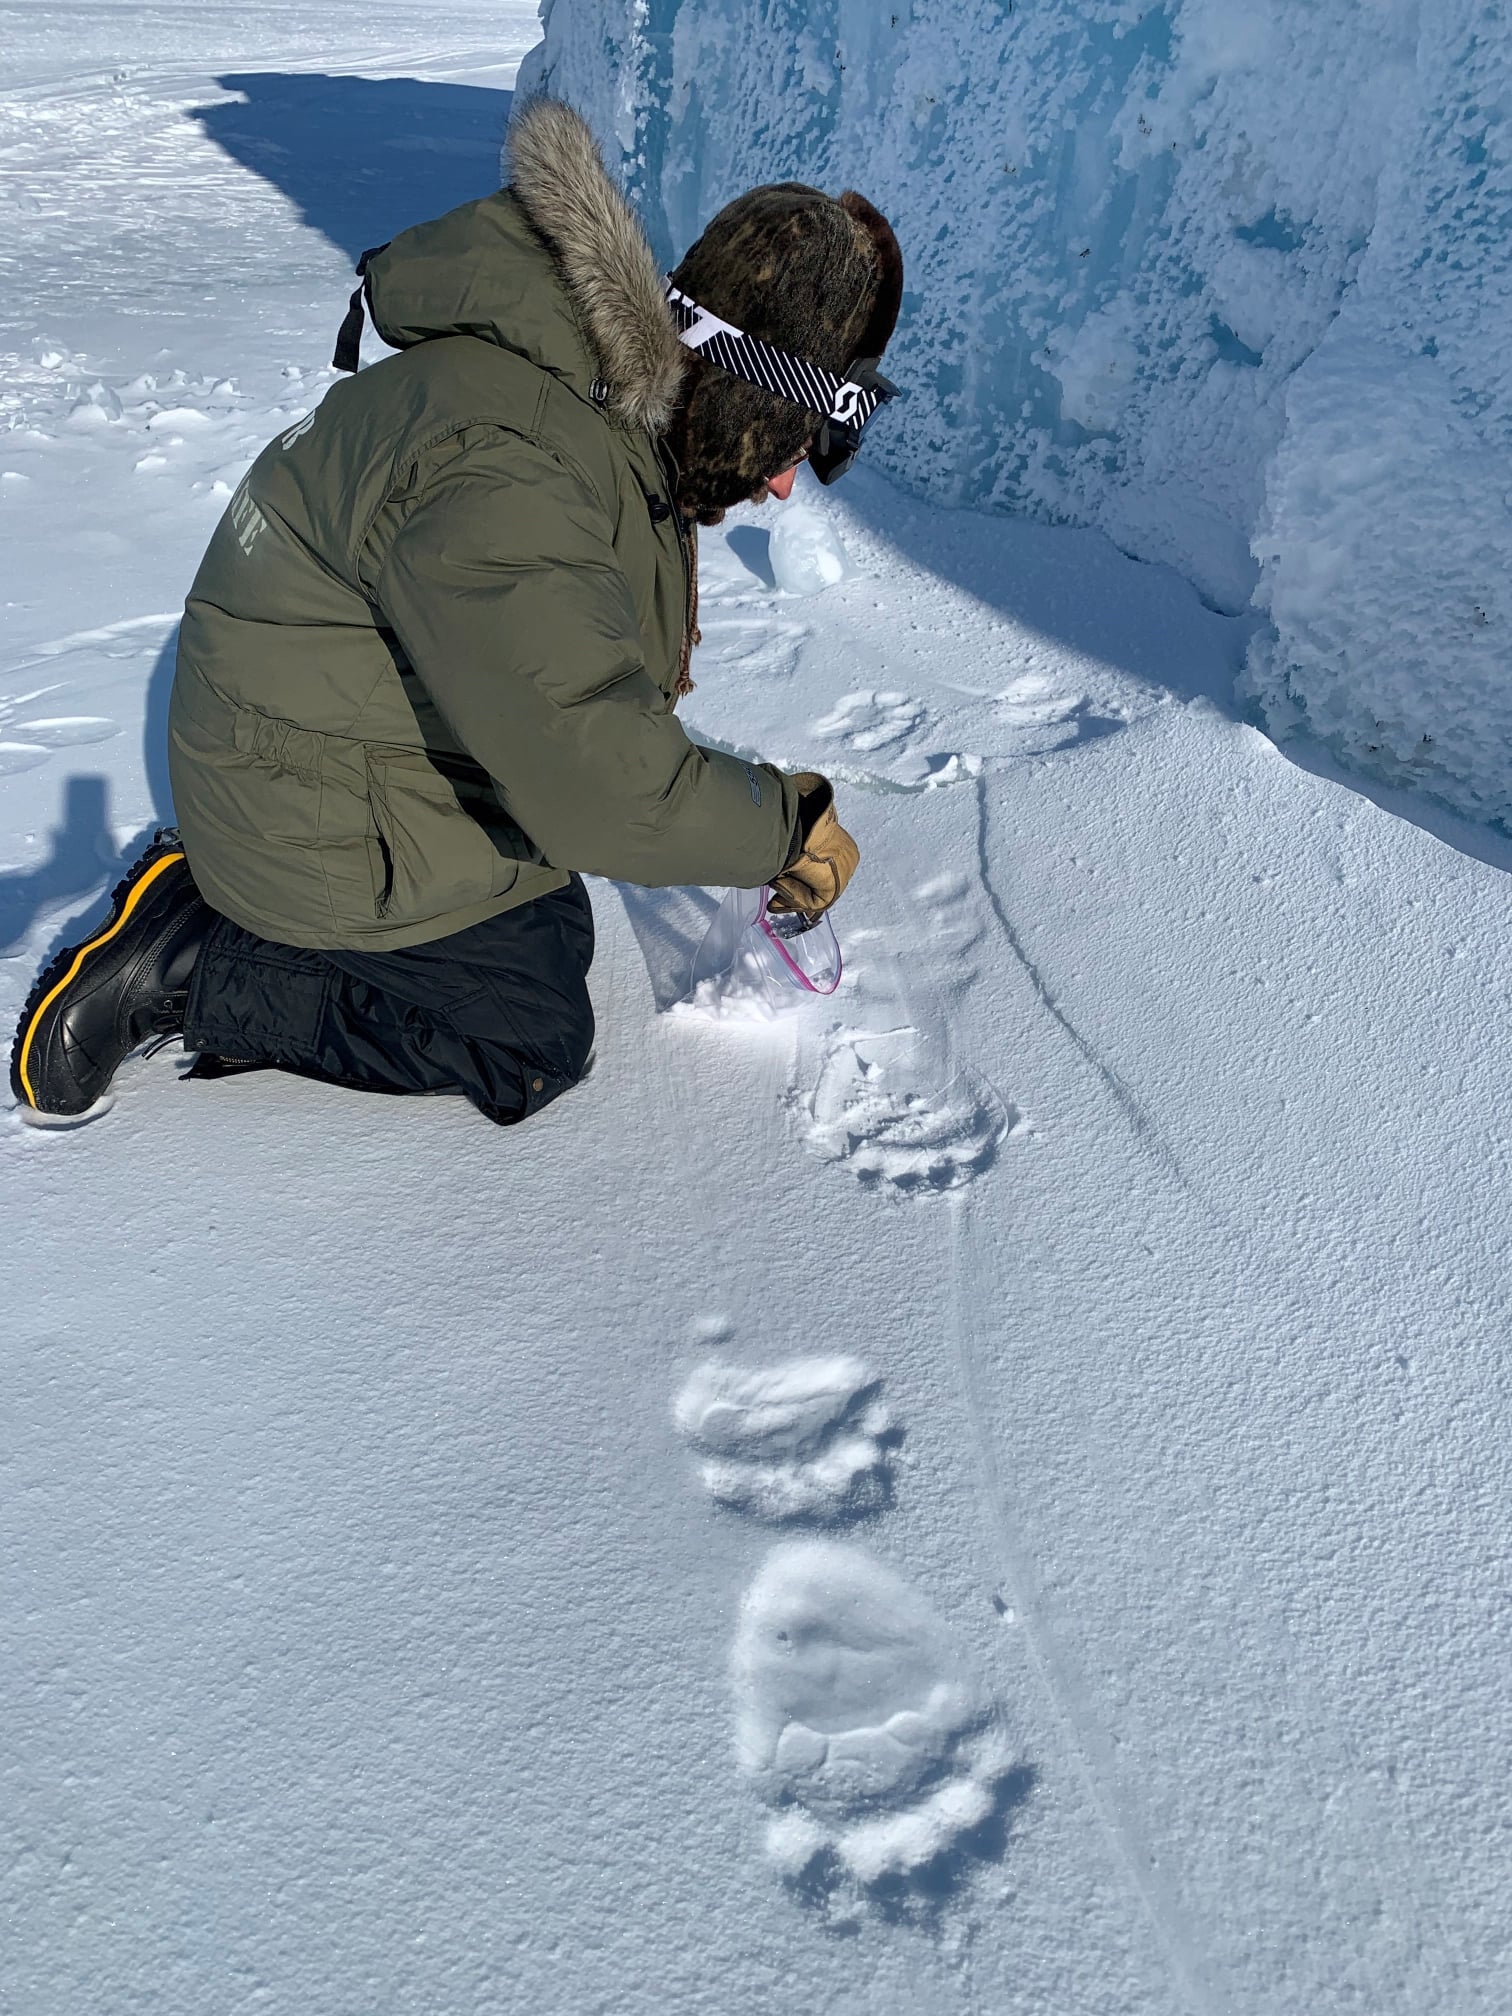 On a sunny day, a man in a winter parka and fur hat kneels in the snow next to polar bear tracks while placing snow scraped from one track into a plastic bag.